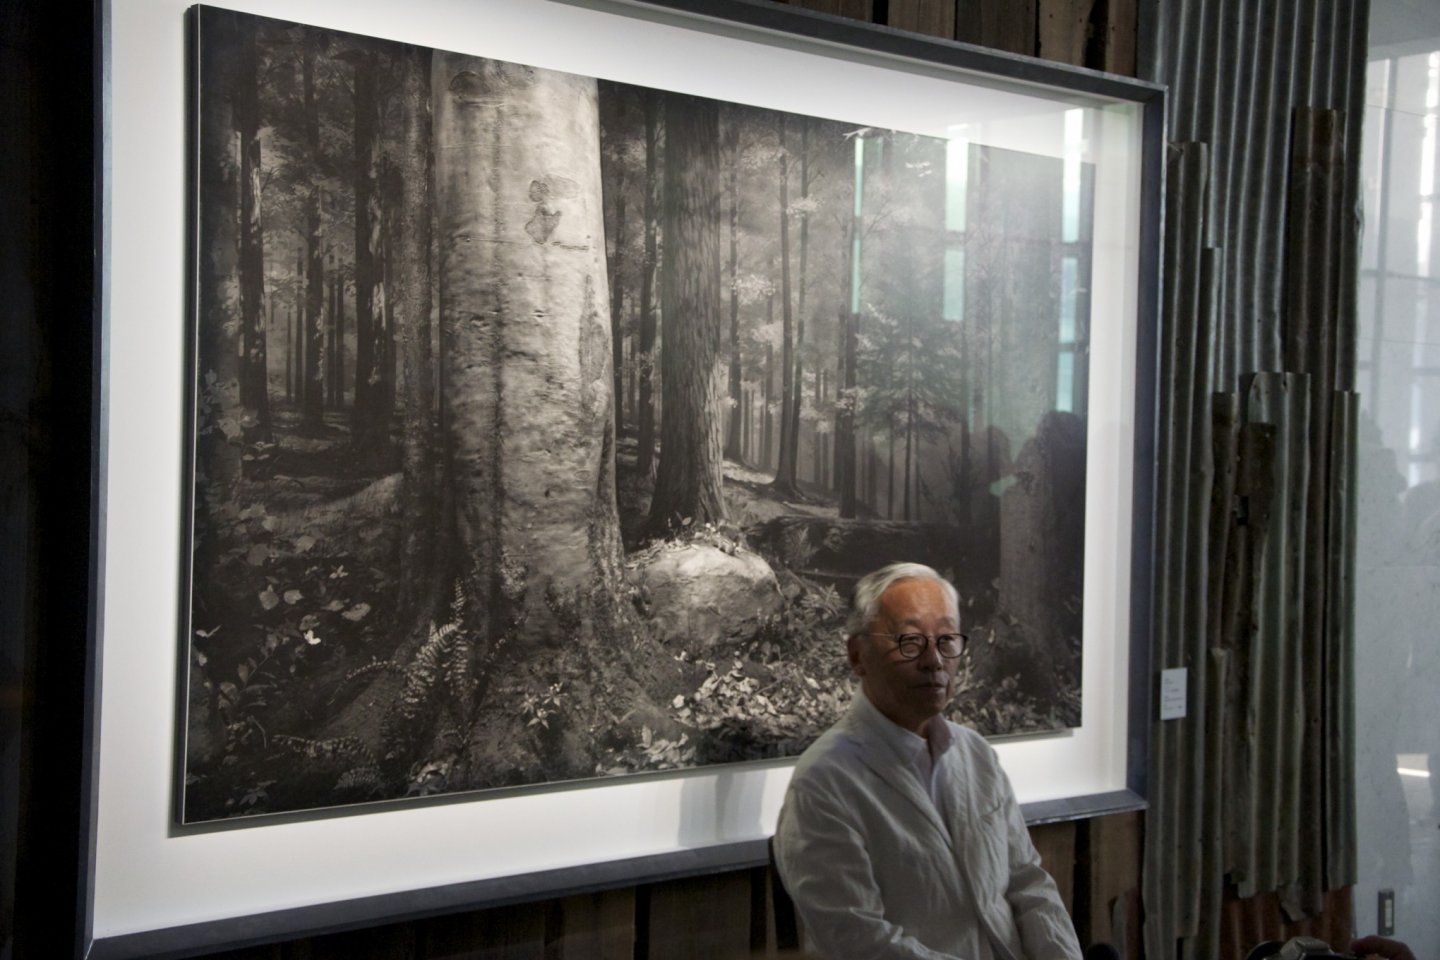 Hiroshi Sugimoto standing in front of one of his images